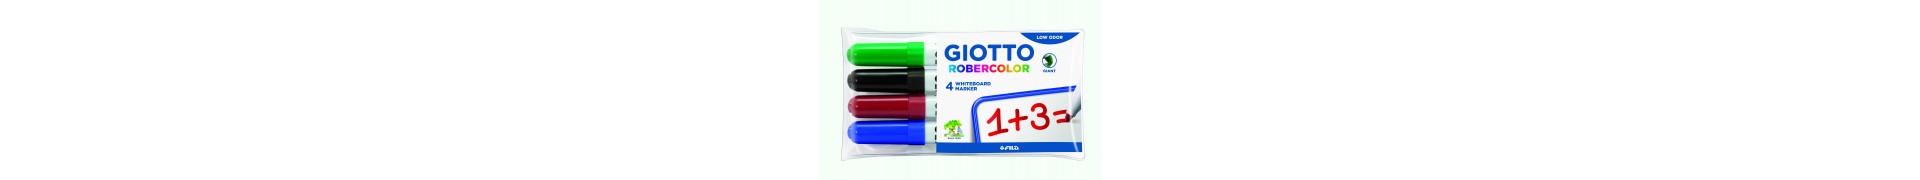 Etui marqueur GIOTTO Robercolor - 4 marqueurs pointe ogive 